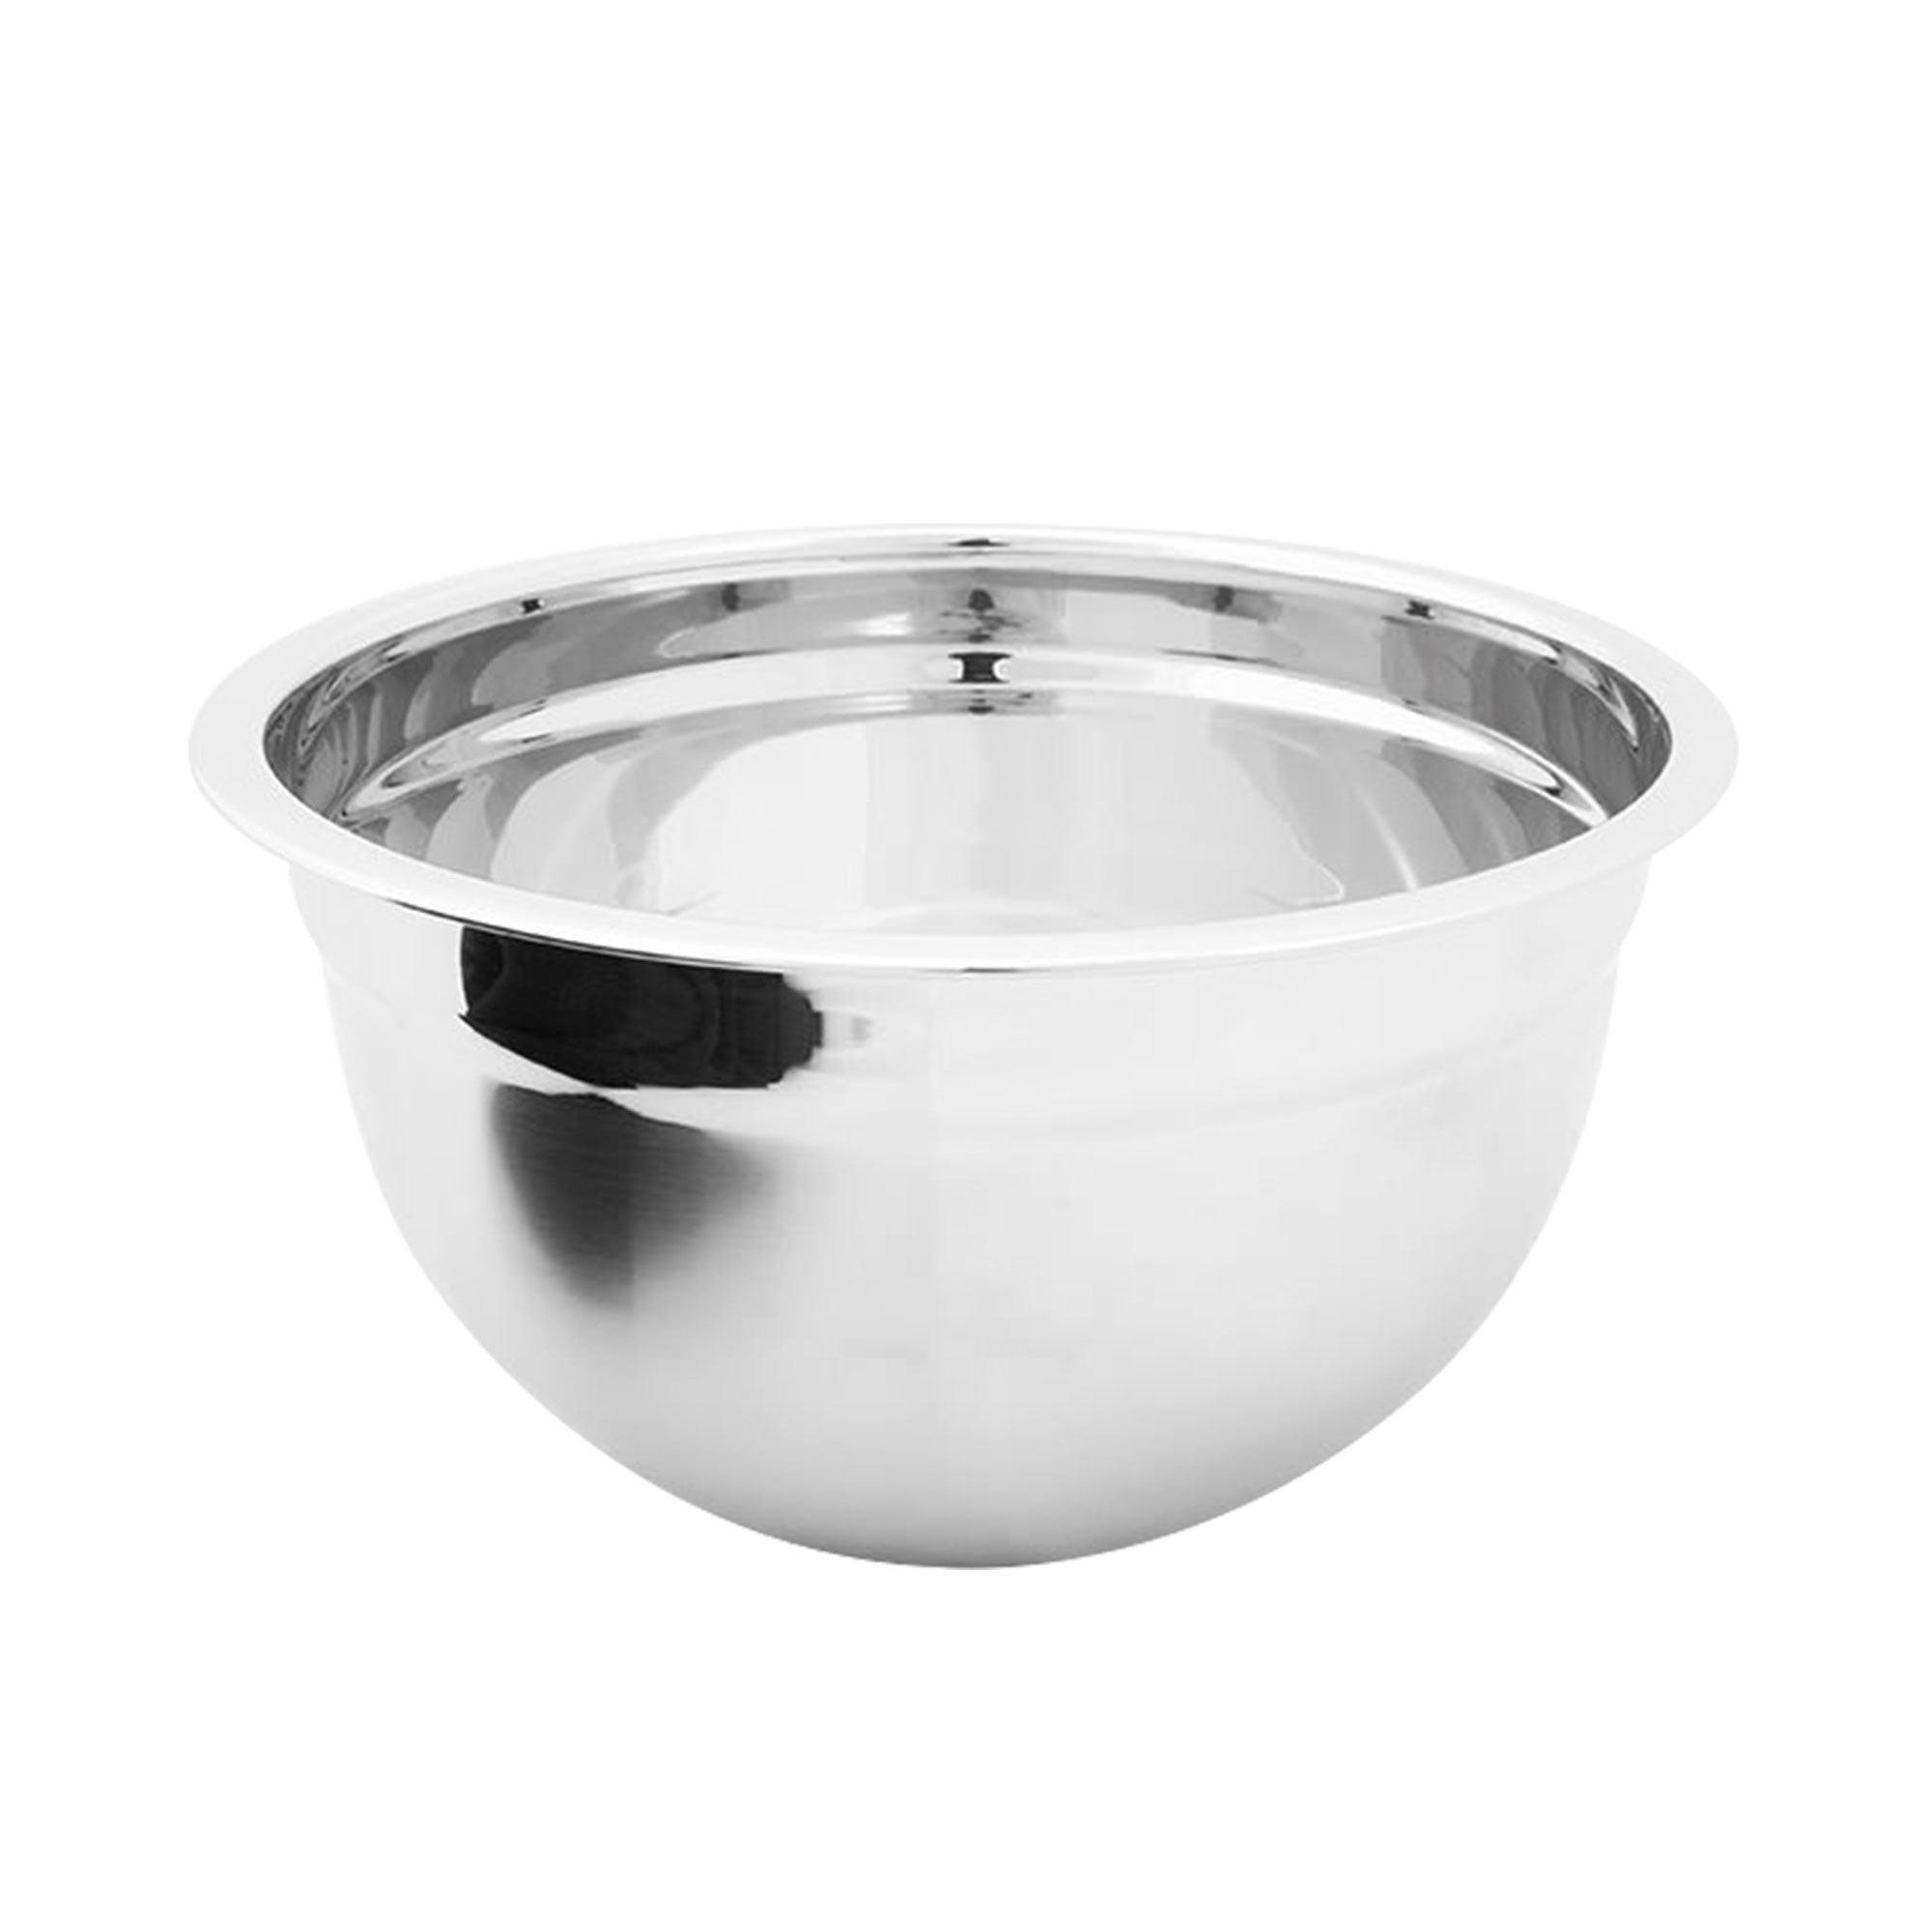 Cuisena Stainless Steel Mixing Bowl 26cm - 5L Image 1